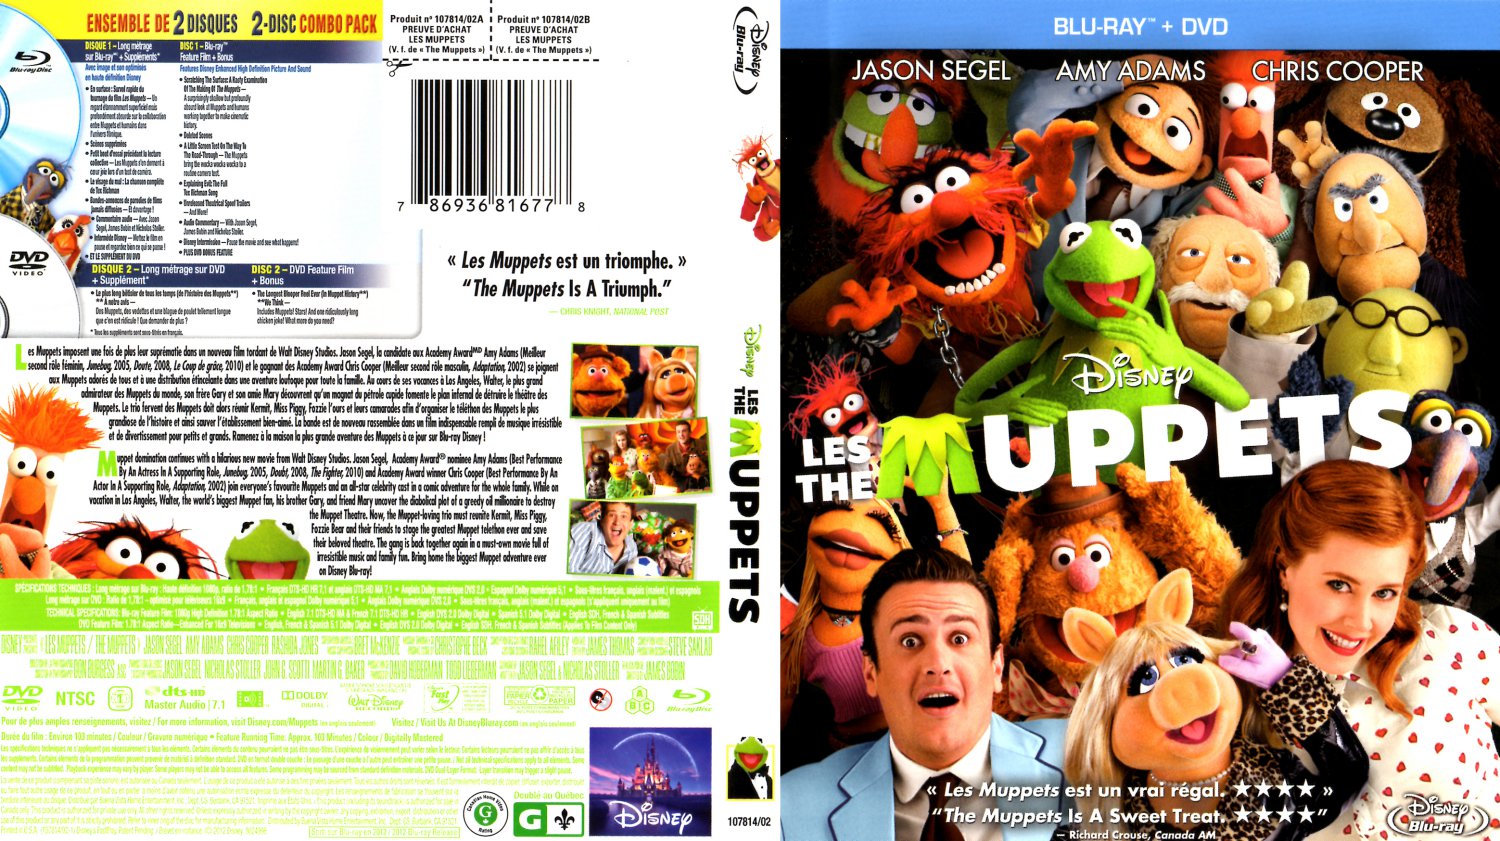 The Muppets - Les Muppets - Bluray